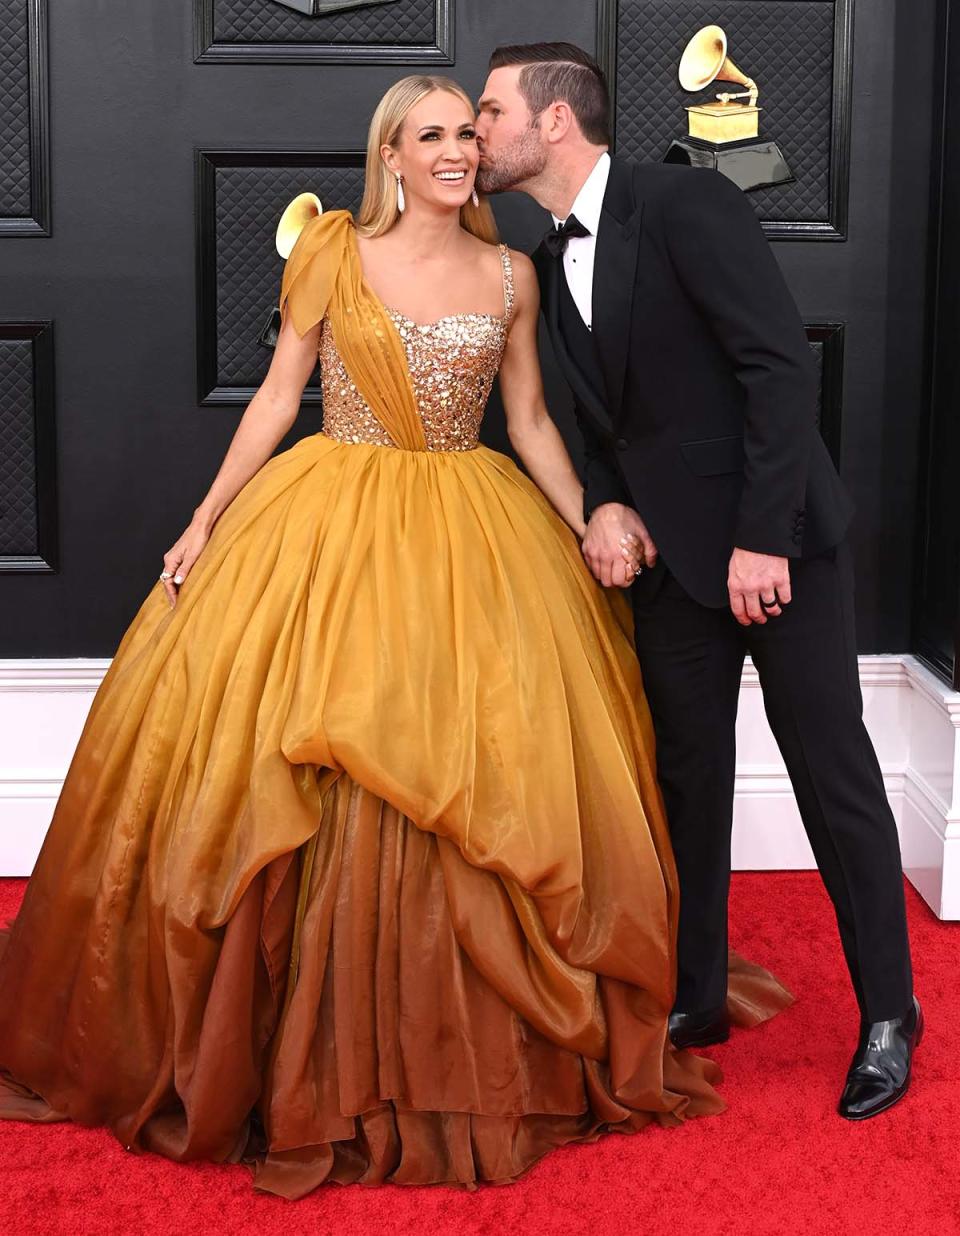 Underwood and Fisher packed on the PDA while attending the Grammy awards.